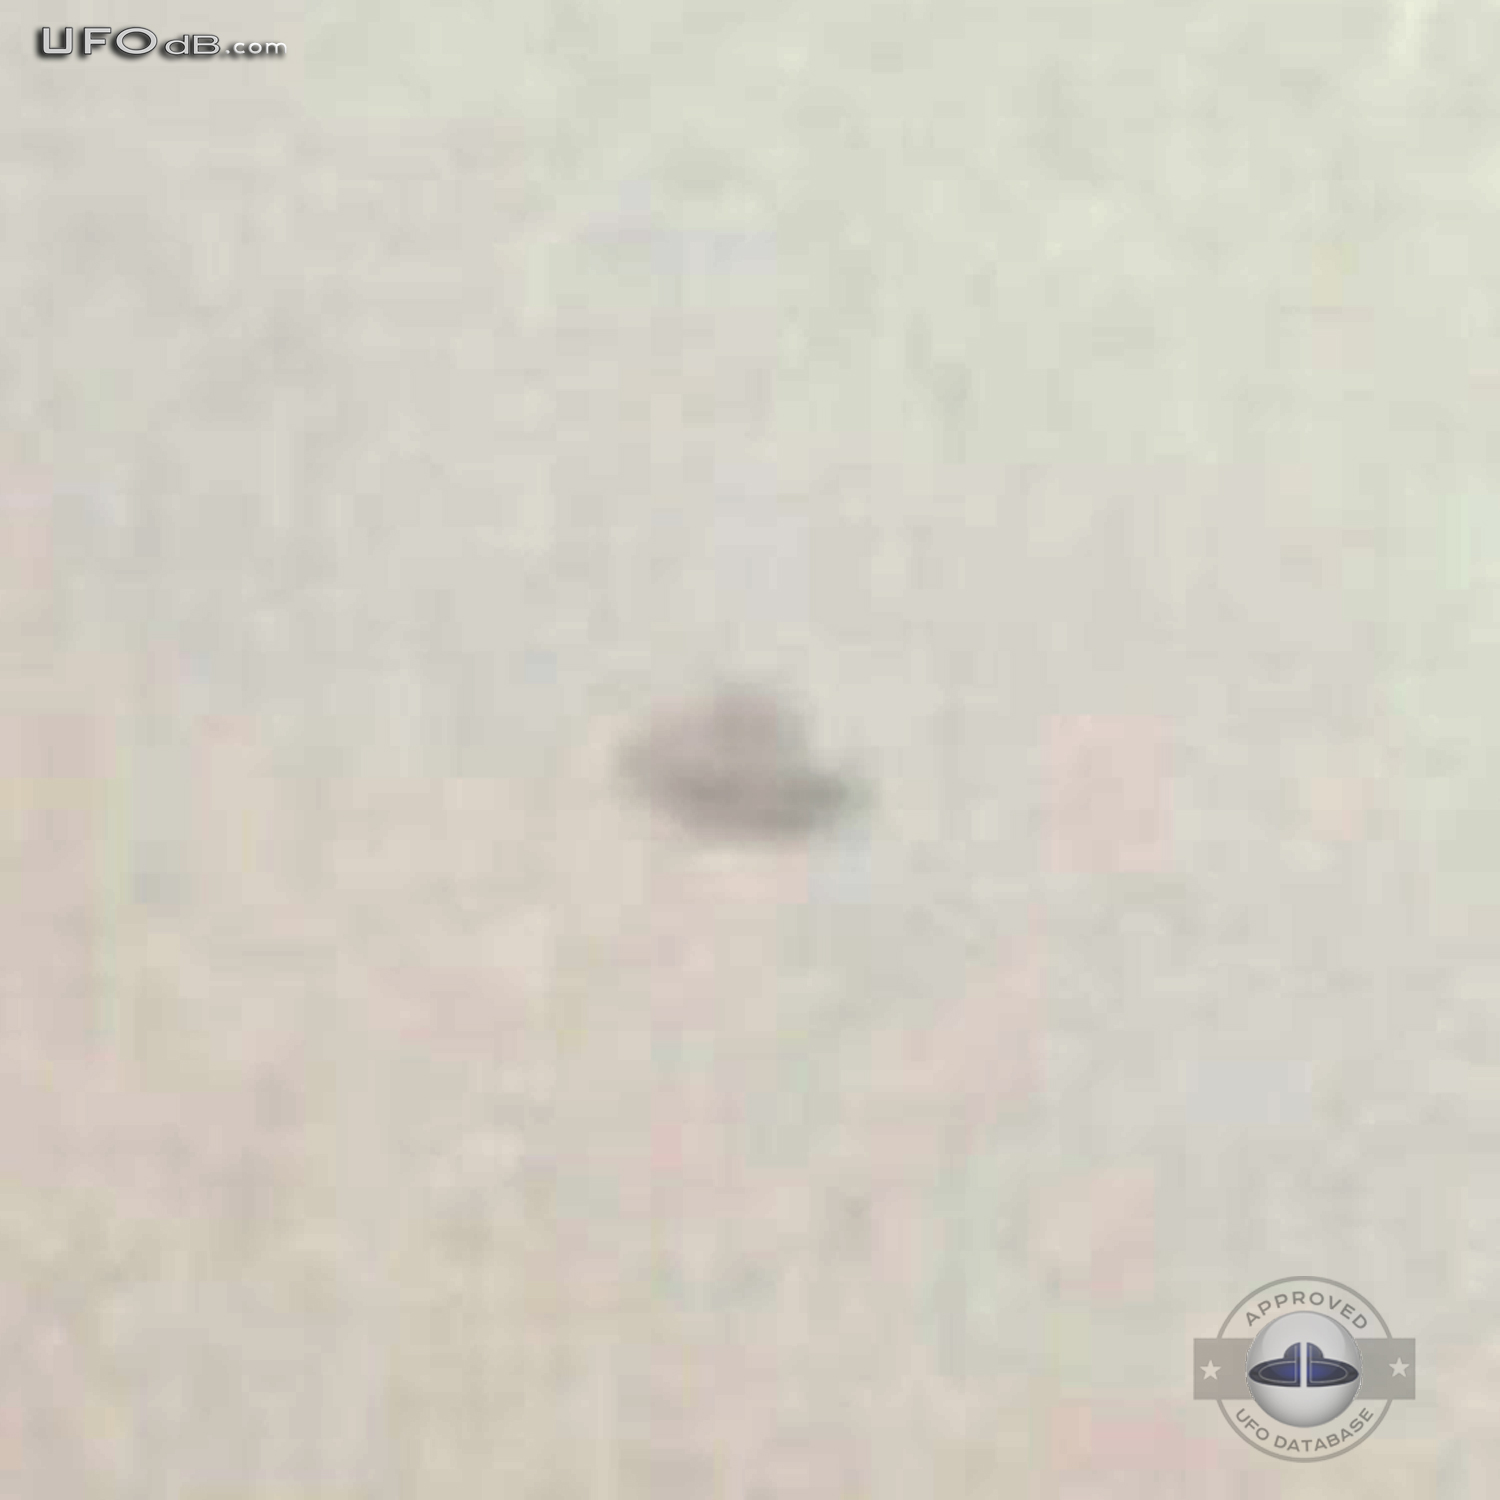 Chinese Sales manager get UFO picture on Hangzhou Bay Bridge in China UFO Picture #359-3